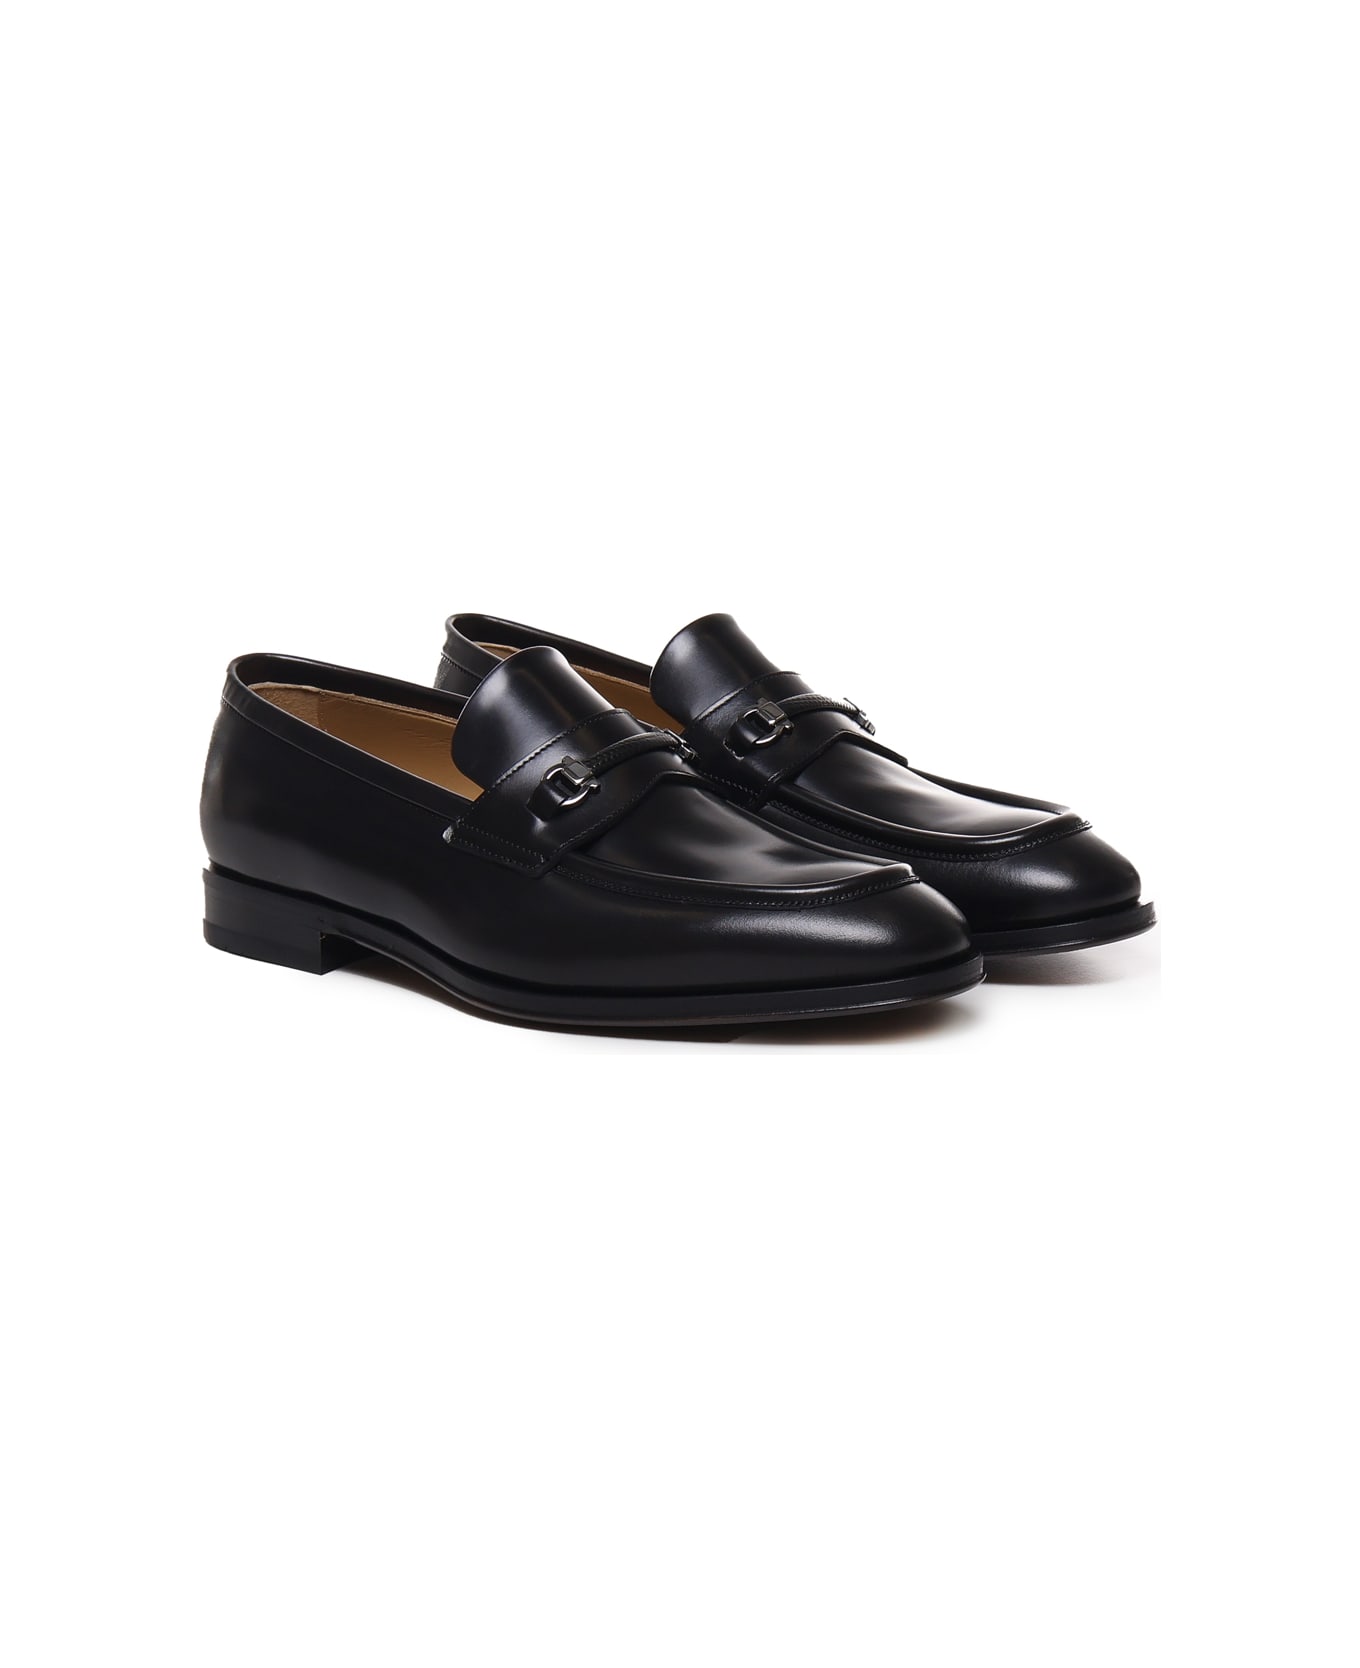 Ferragamo Leather Loafers With Gancini - Black